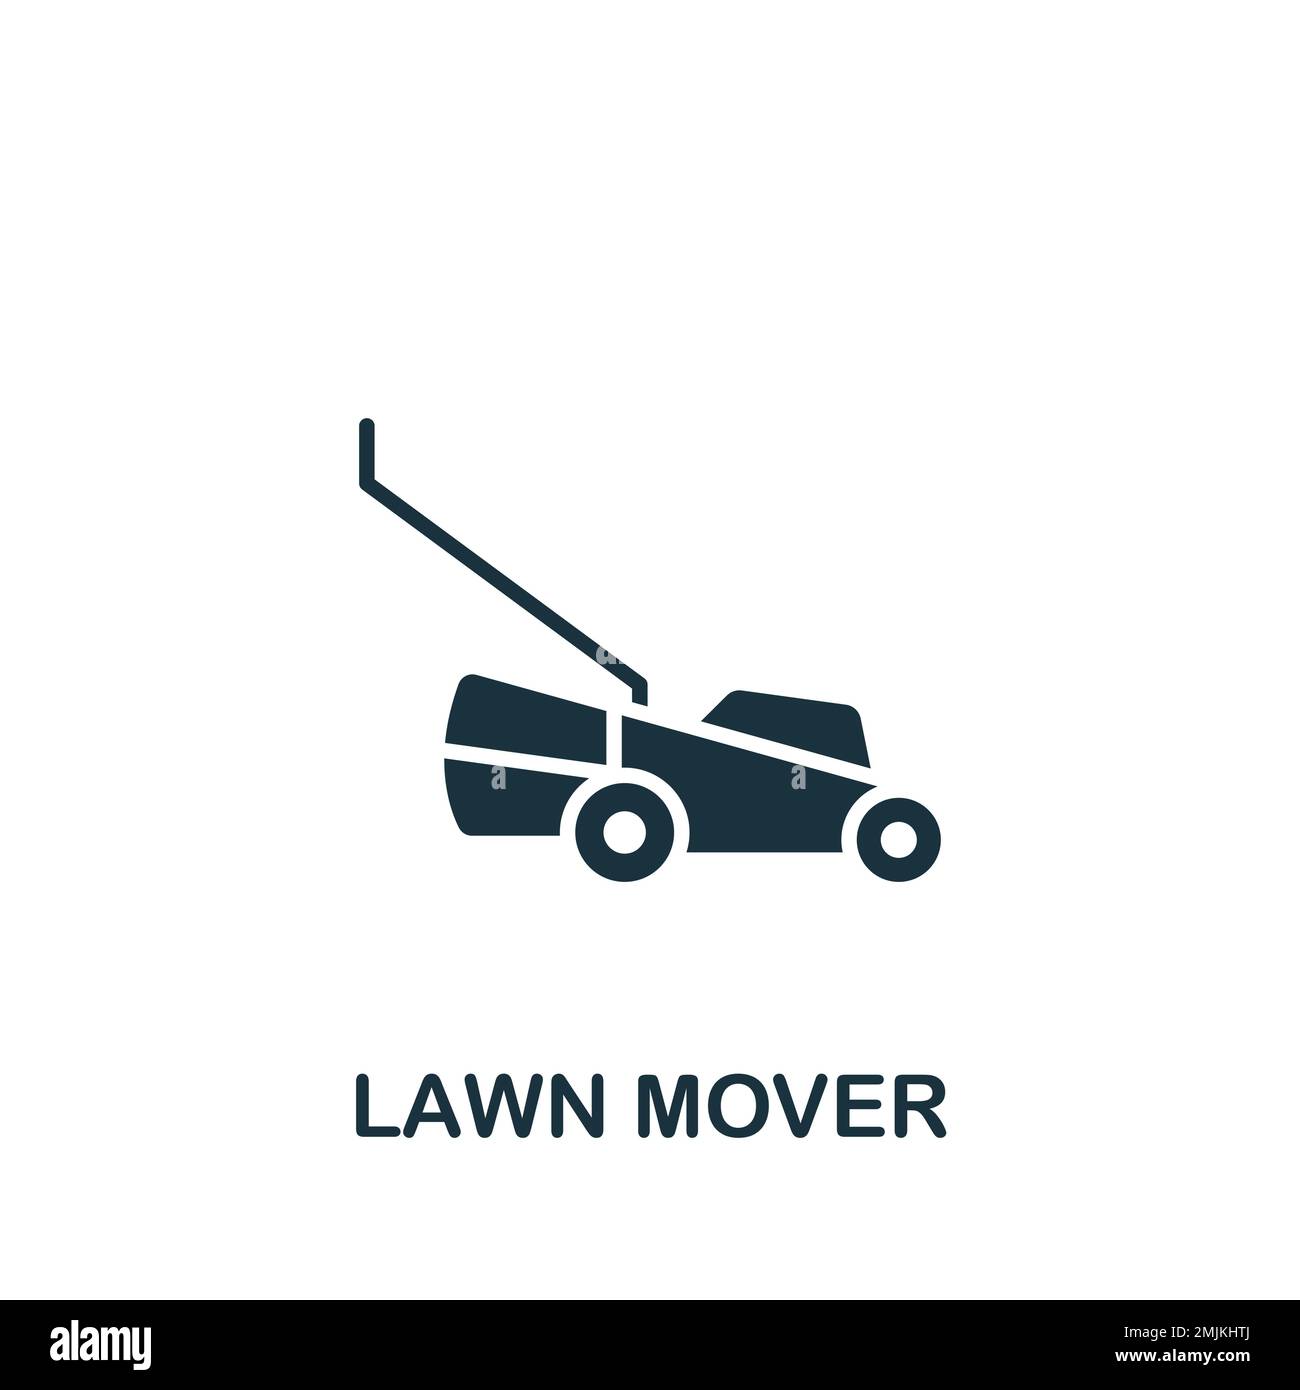 Lawn mover icon. Monochrome simple sign from agriculture collection. Lawn mover icon for logo, templates, web design and infographics. Stock Vector